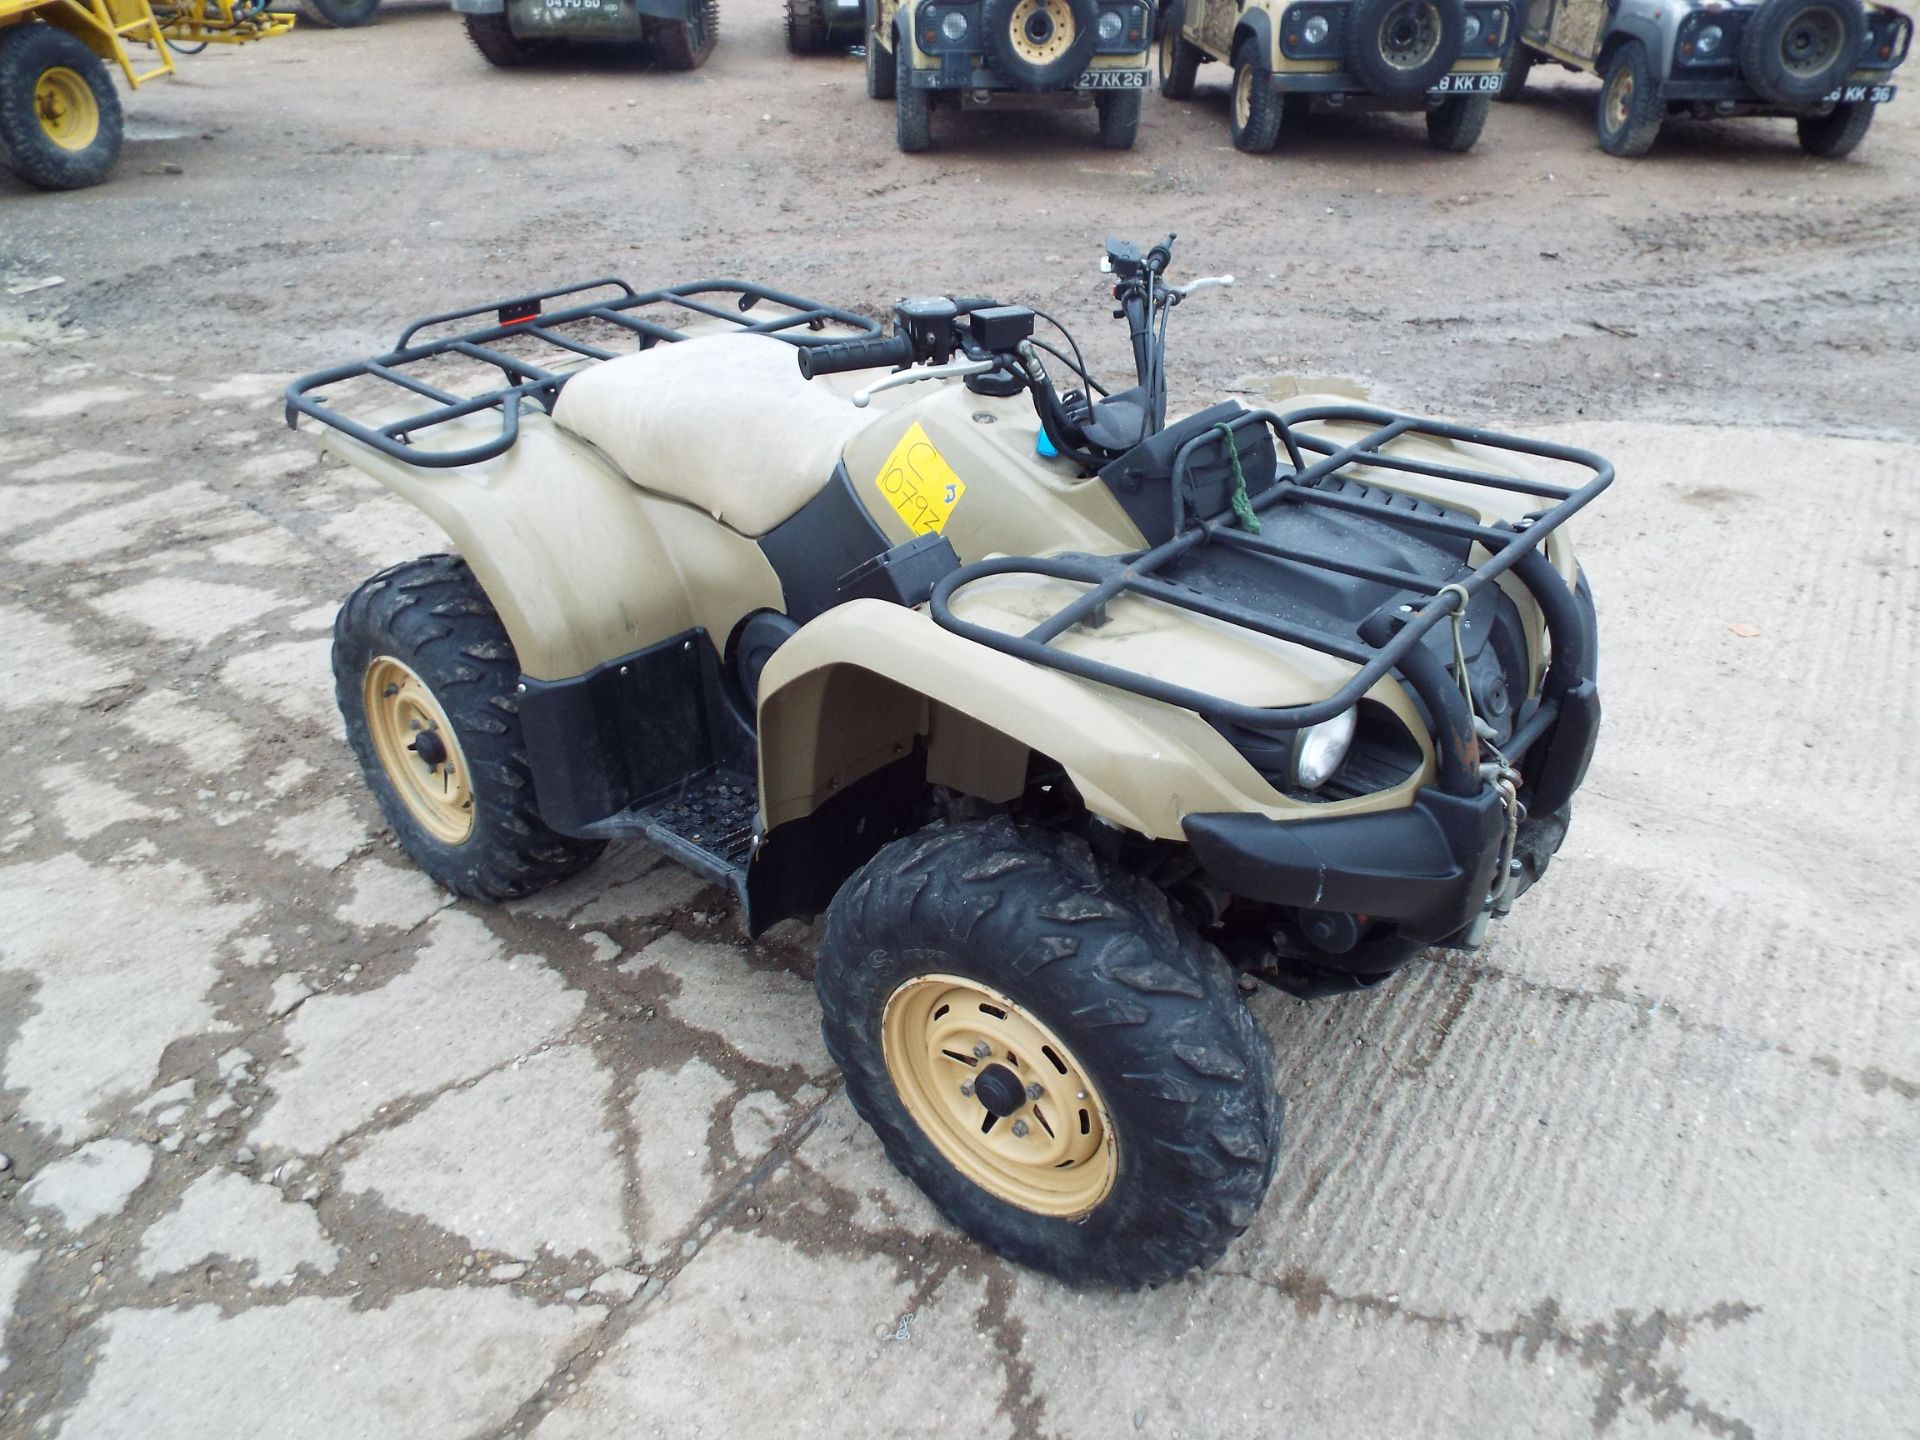 Military Specification Yamaha Grizzly 450 4 x 4 ATV Quad Bike Complete with Winch